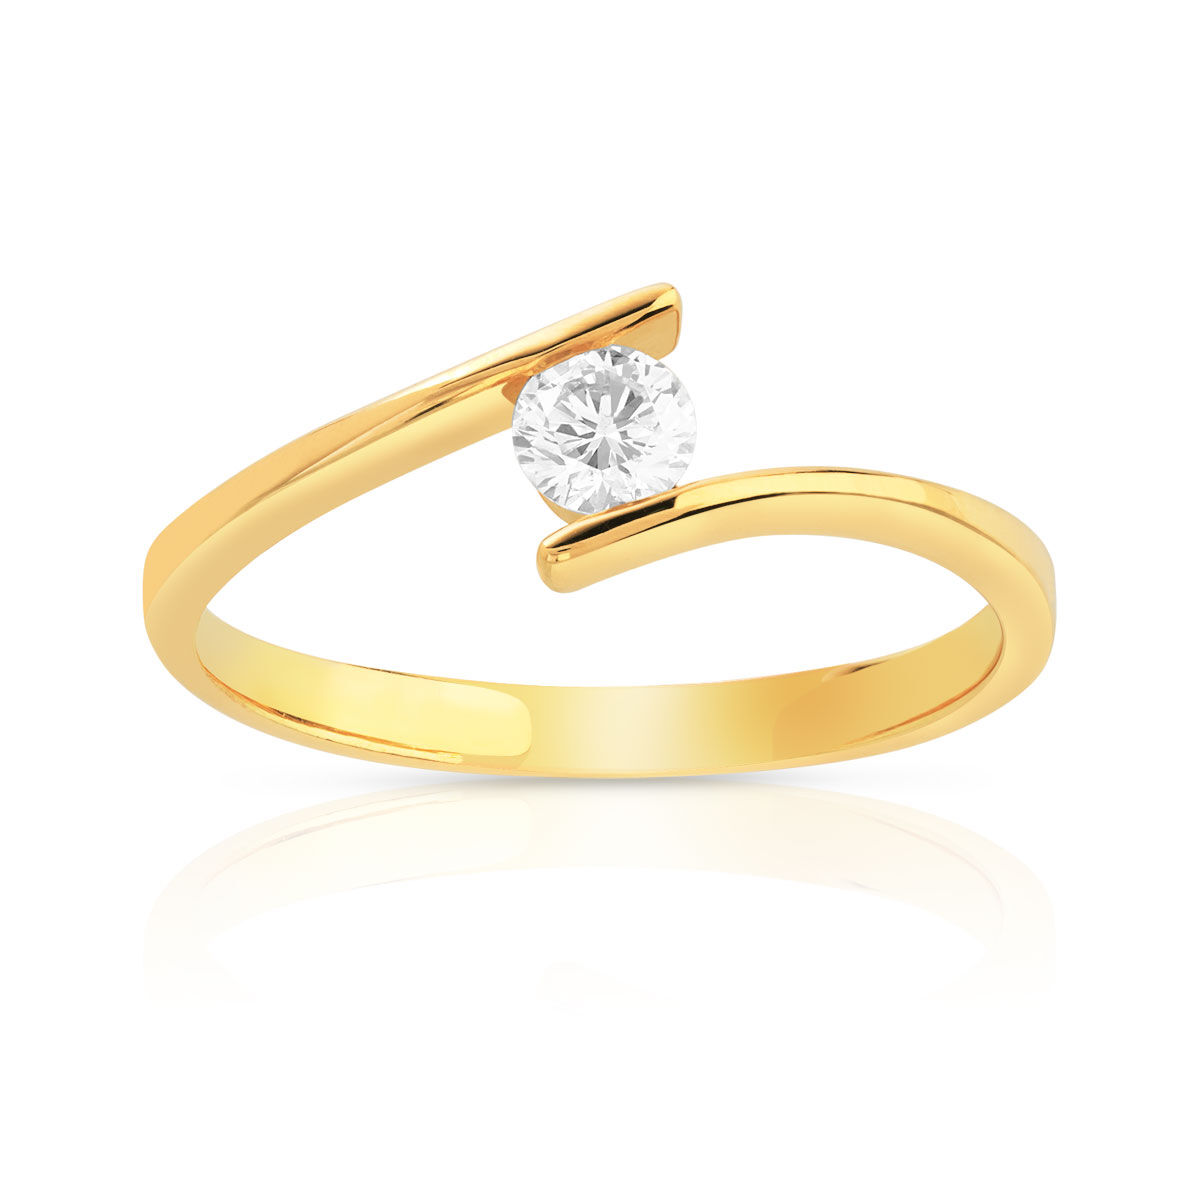 MATY Solitaire or jaune 750 diamant synthÃ©tique 0.20 carat- MATY